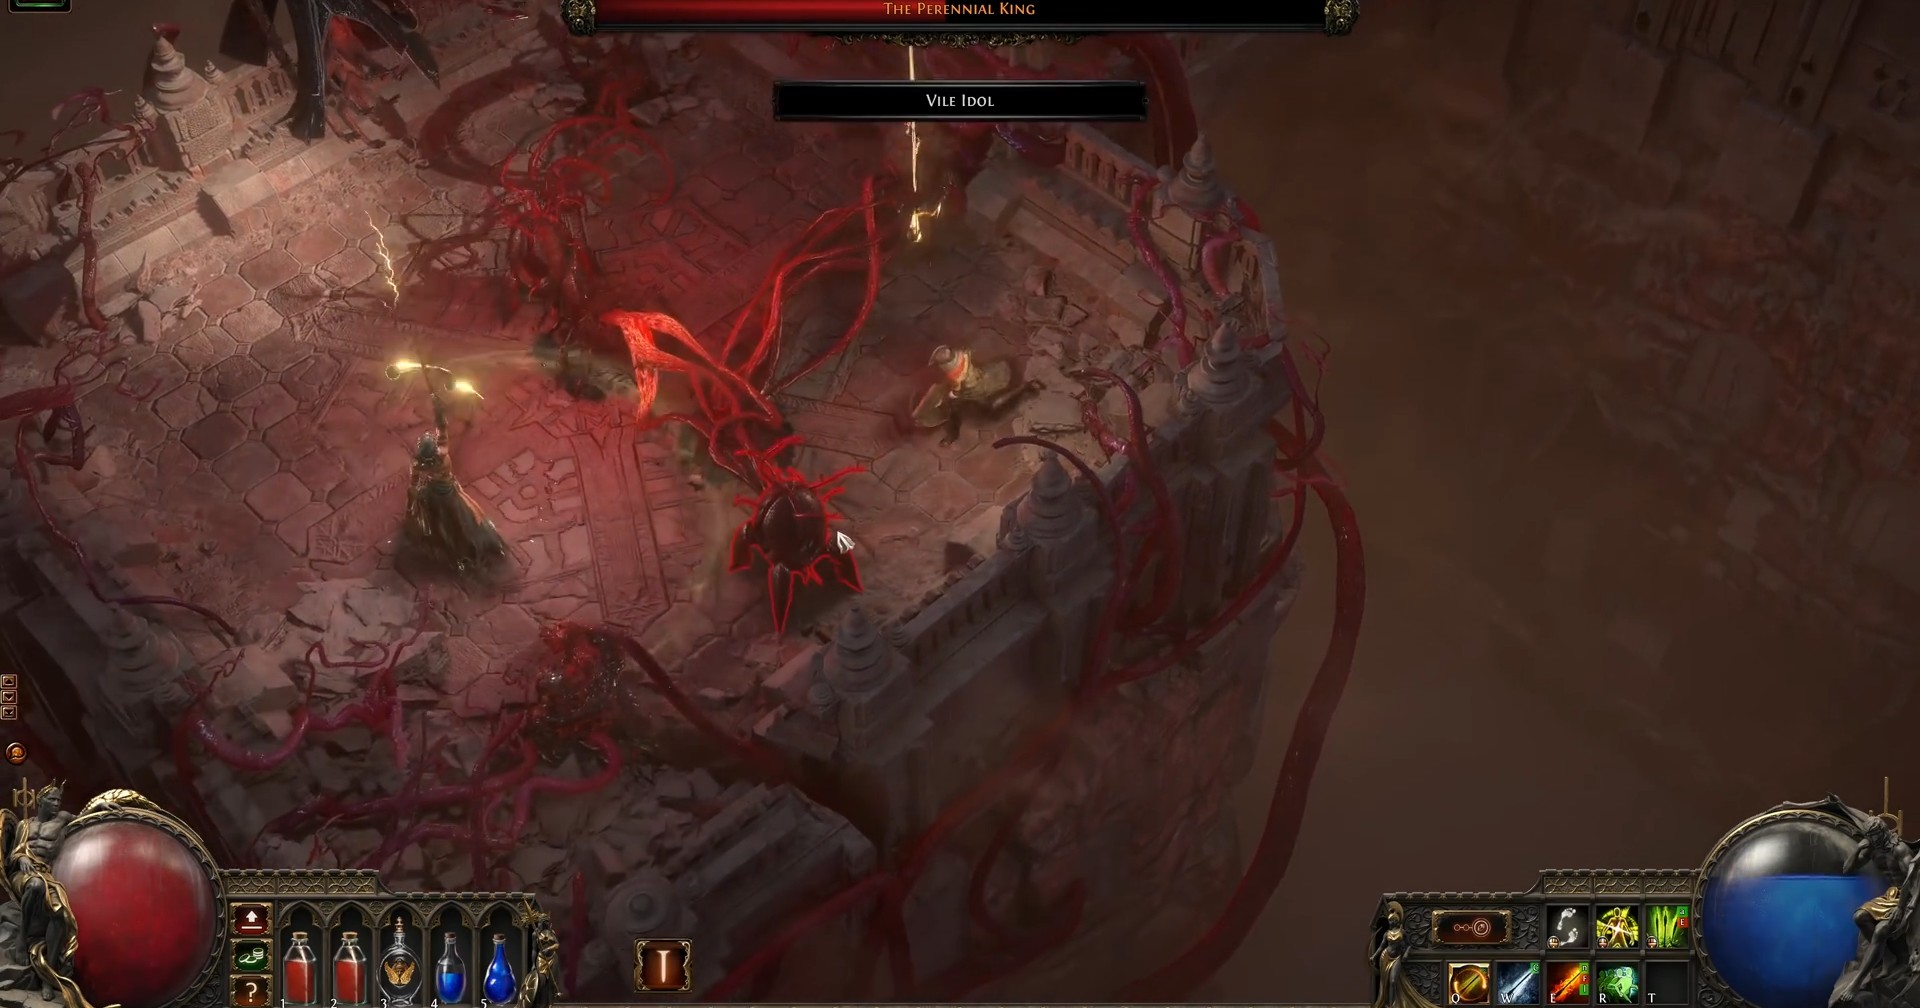 Path of Exile 2 nears its release date and offers 19 classes. Here we see a character in a dungeon full of bloody vines.